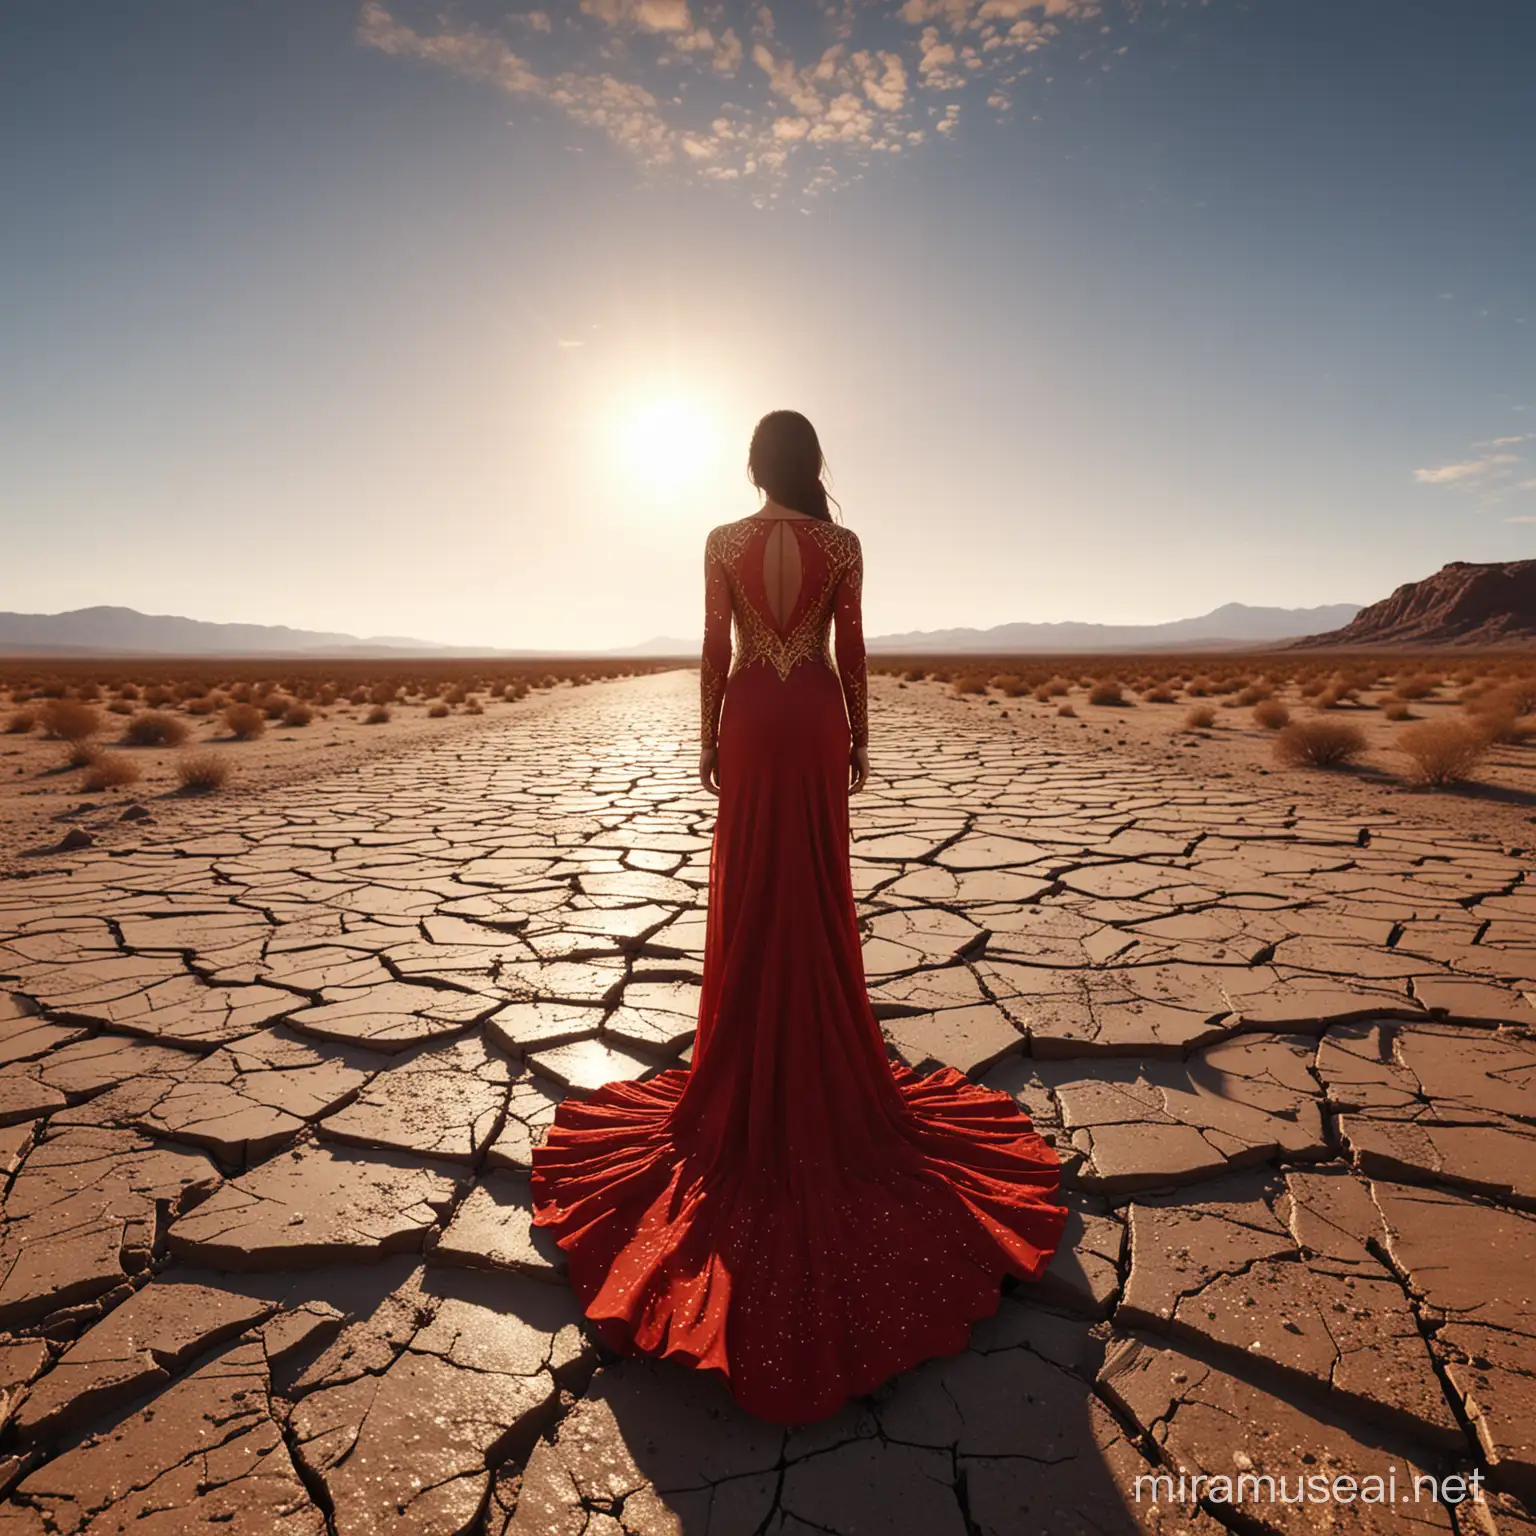 Mysterious Woman in Golden Red Dress Contemplating Sky Fragment in Desert